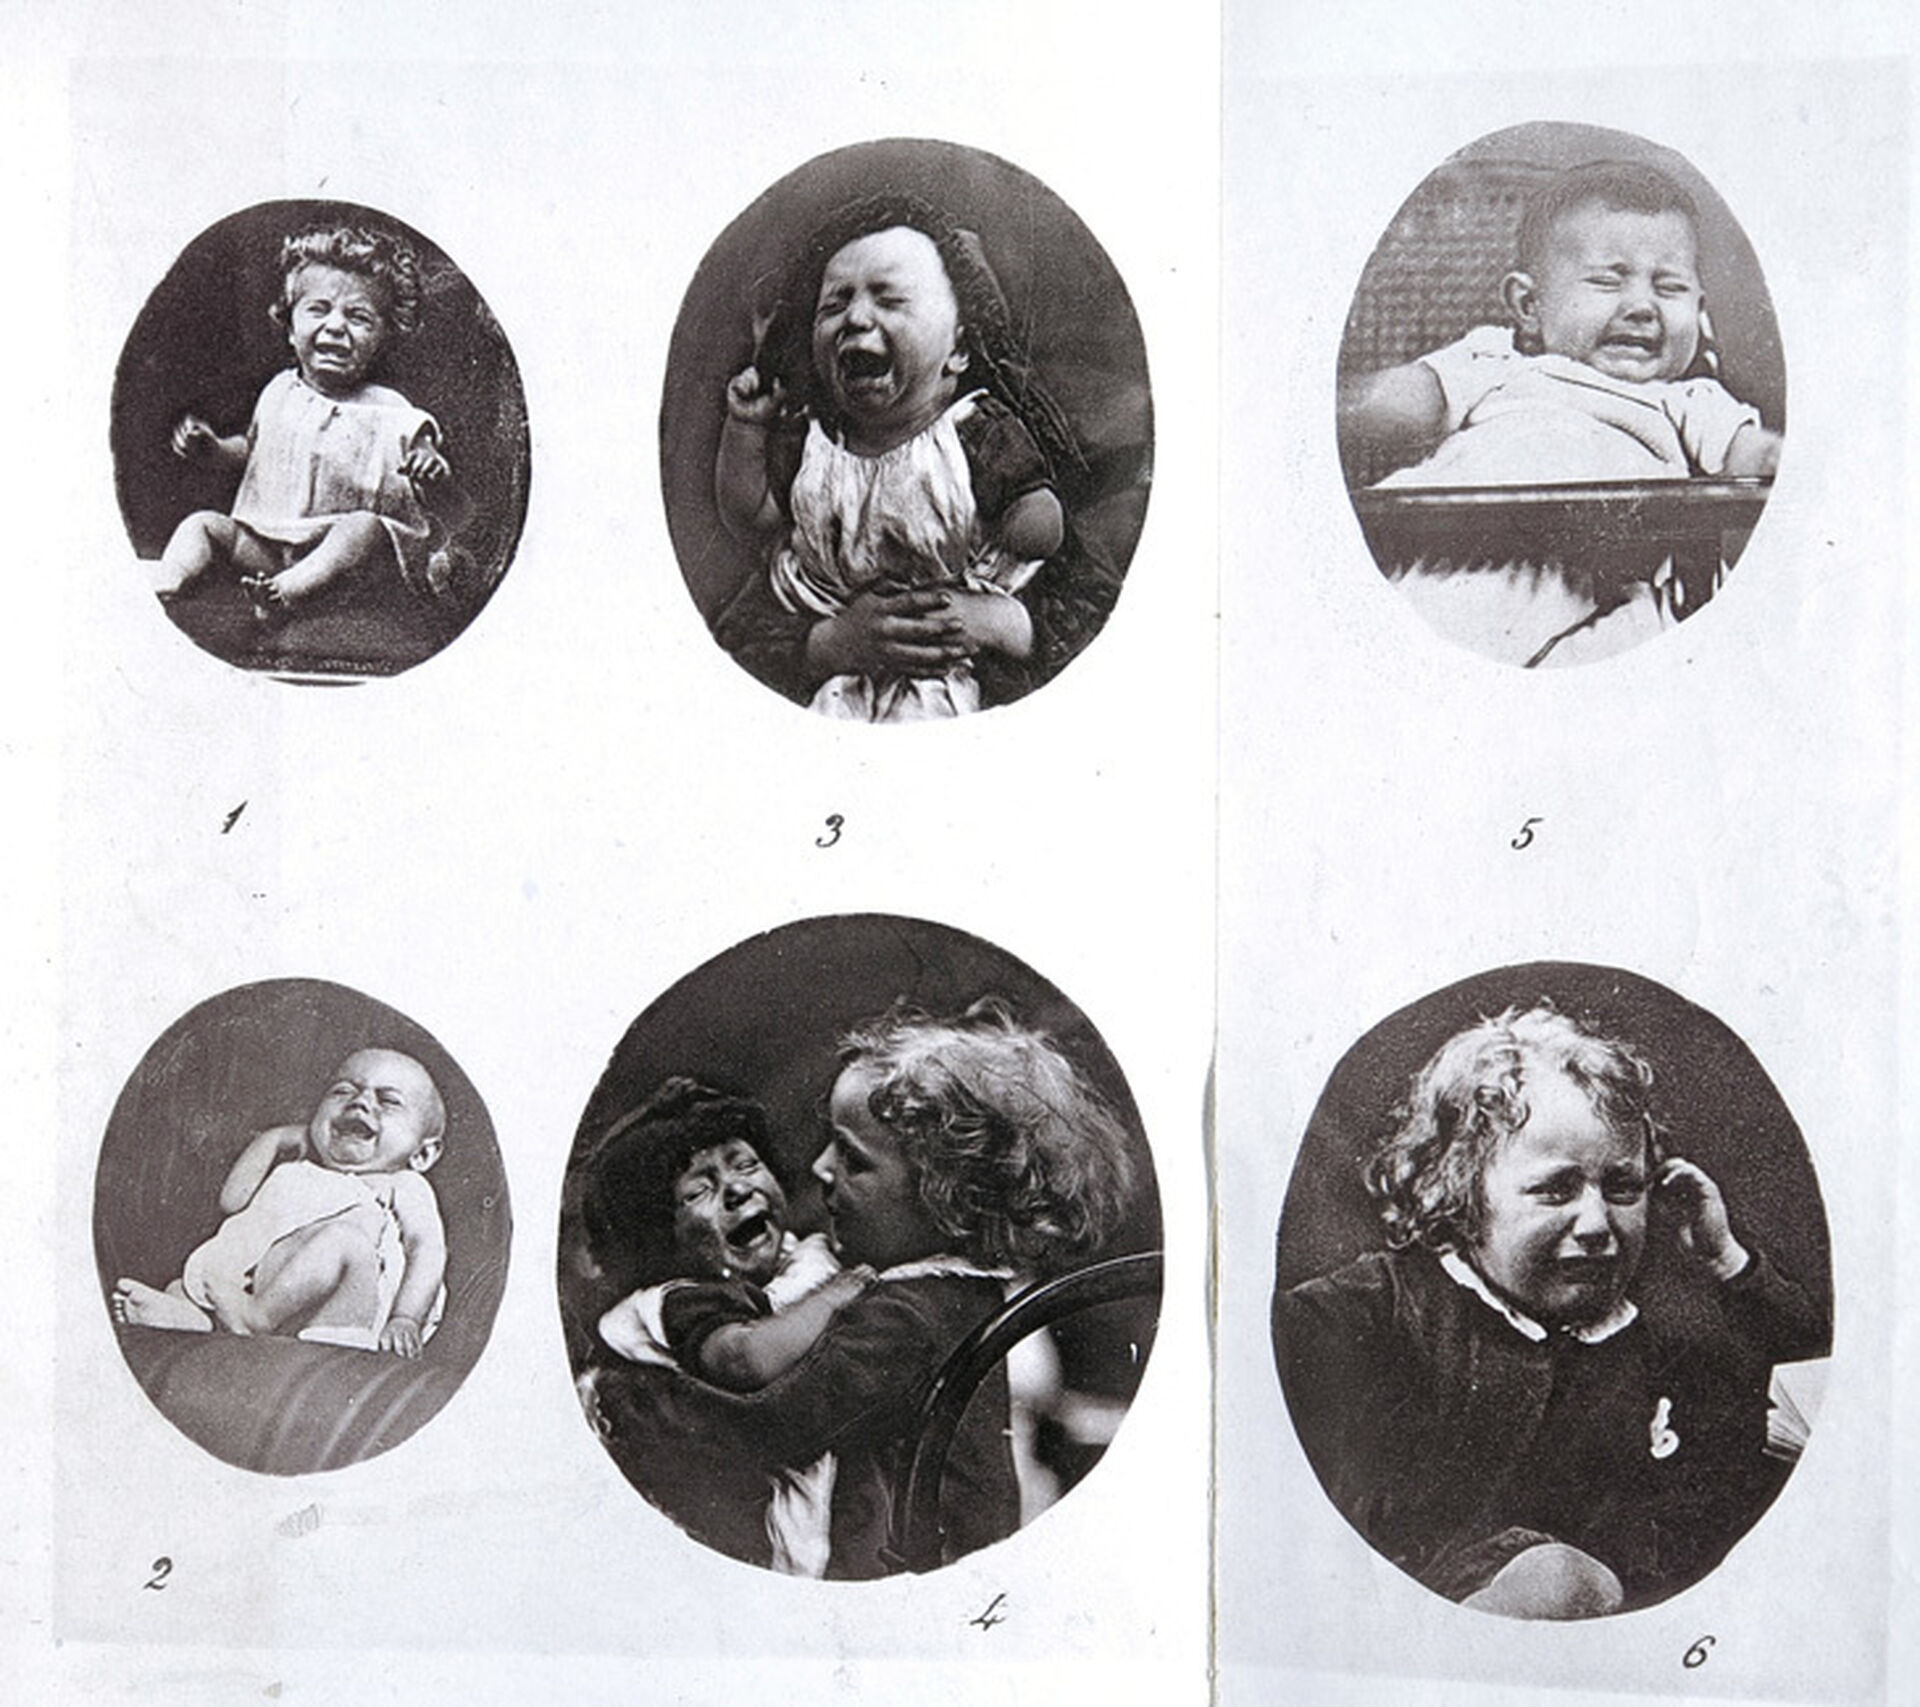 Pictures in Charles Dawrwin's book The Expression of the Emotions in Man and Animals, showing "Suffering and Crying".